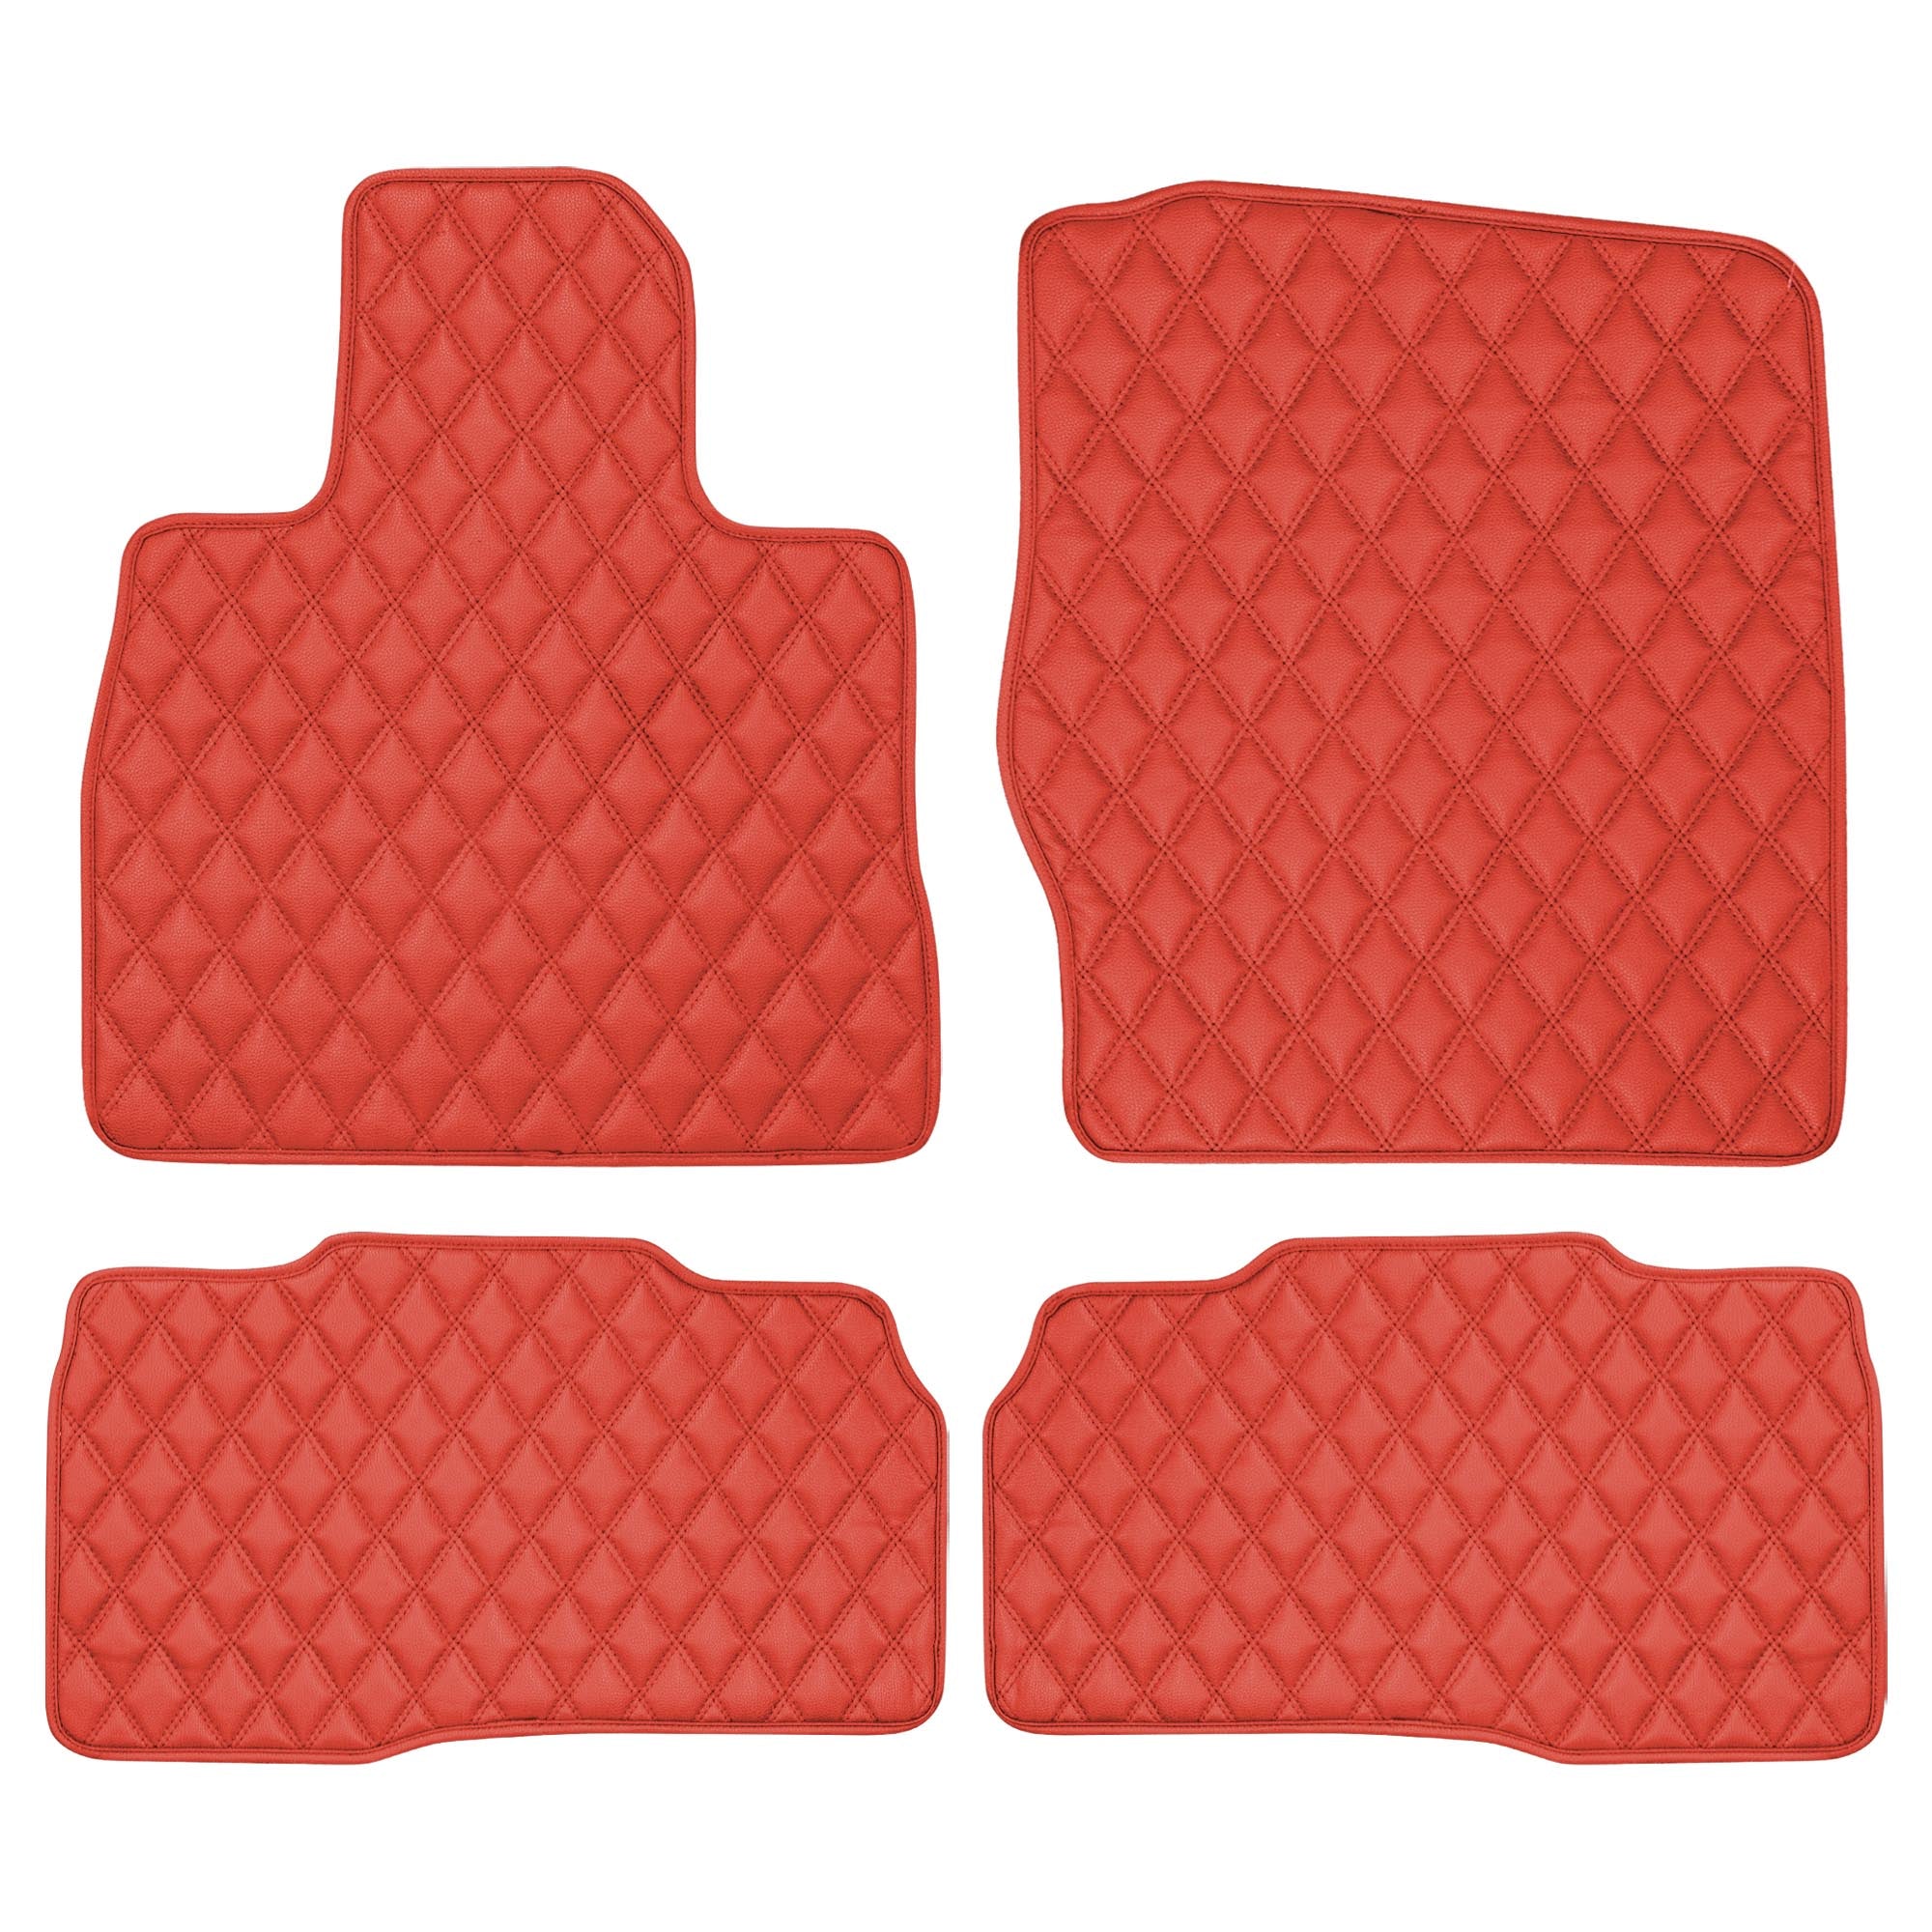 Faux Leather Custom-Fit Floor Mats for 2020-2022 Ford Explorer - Red